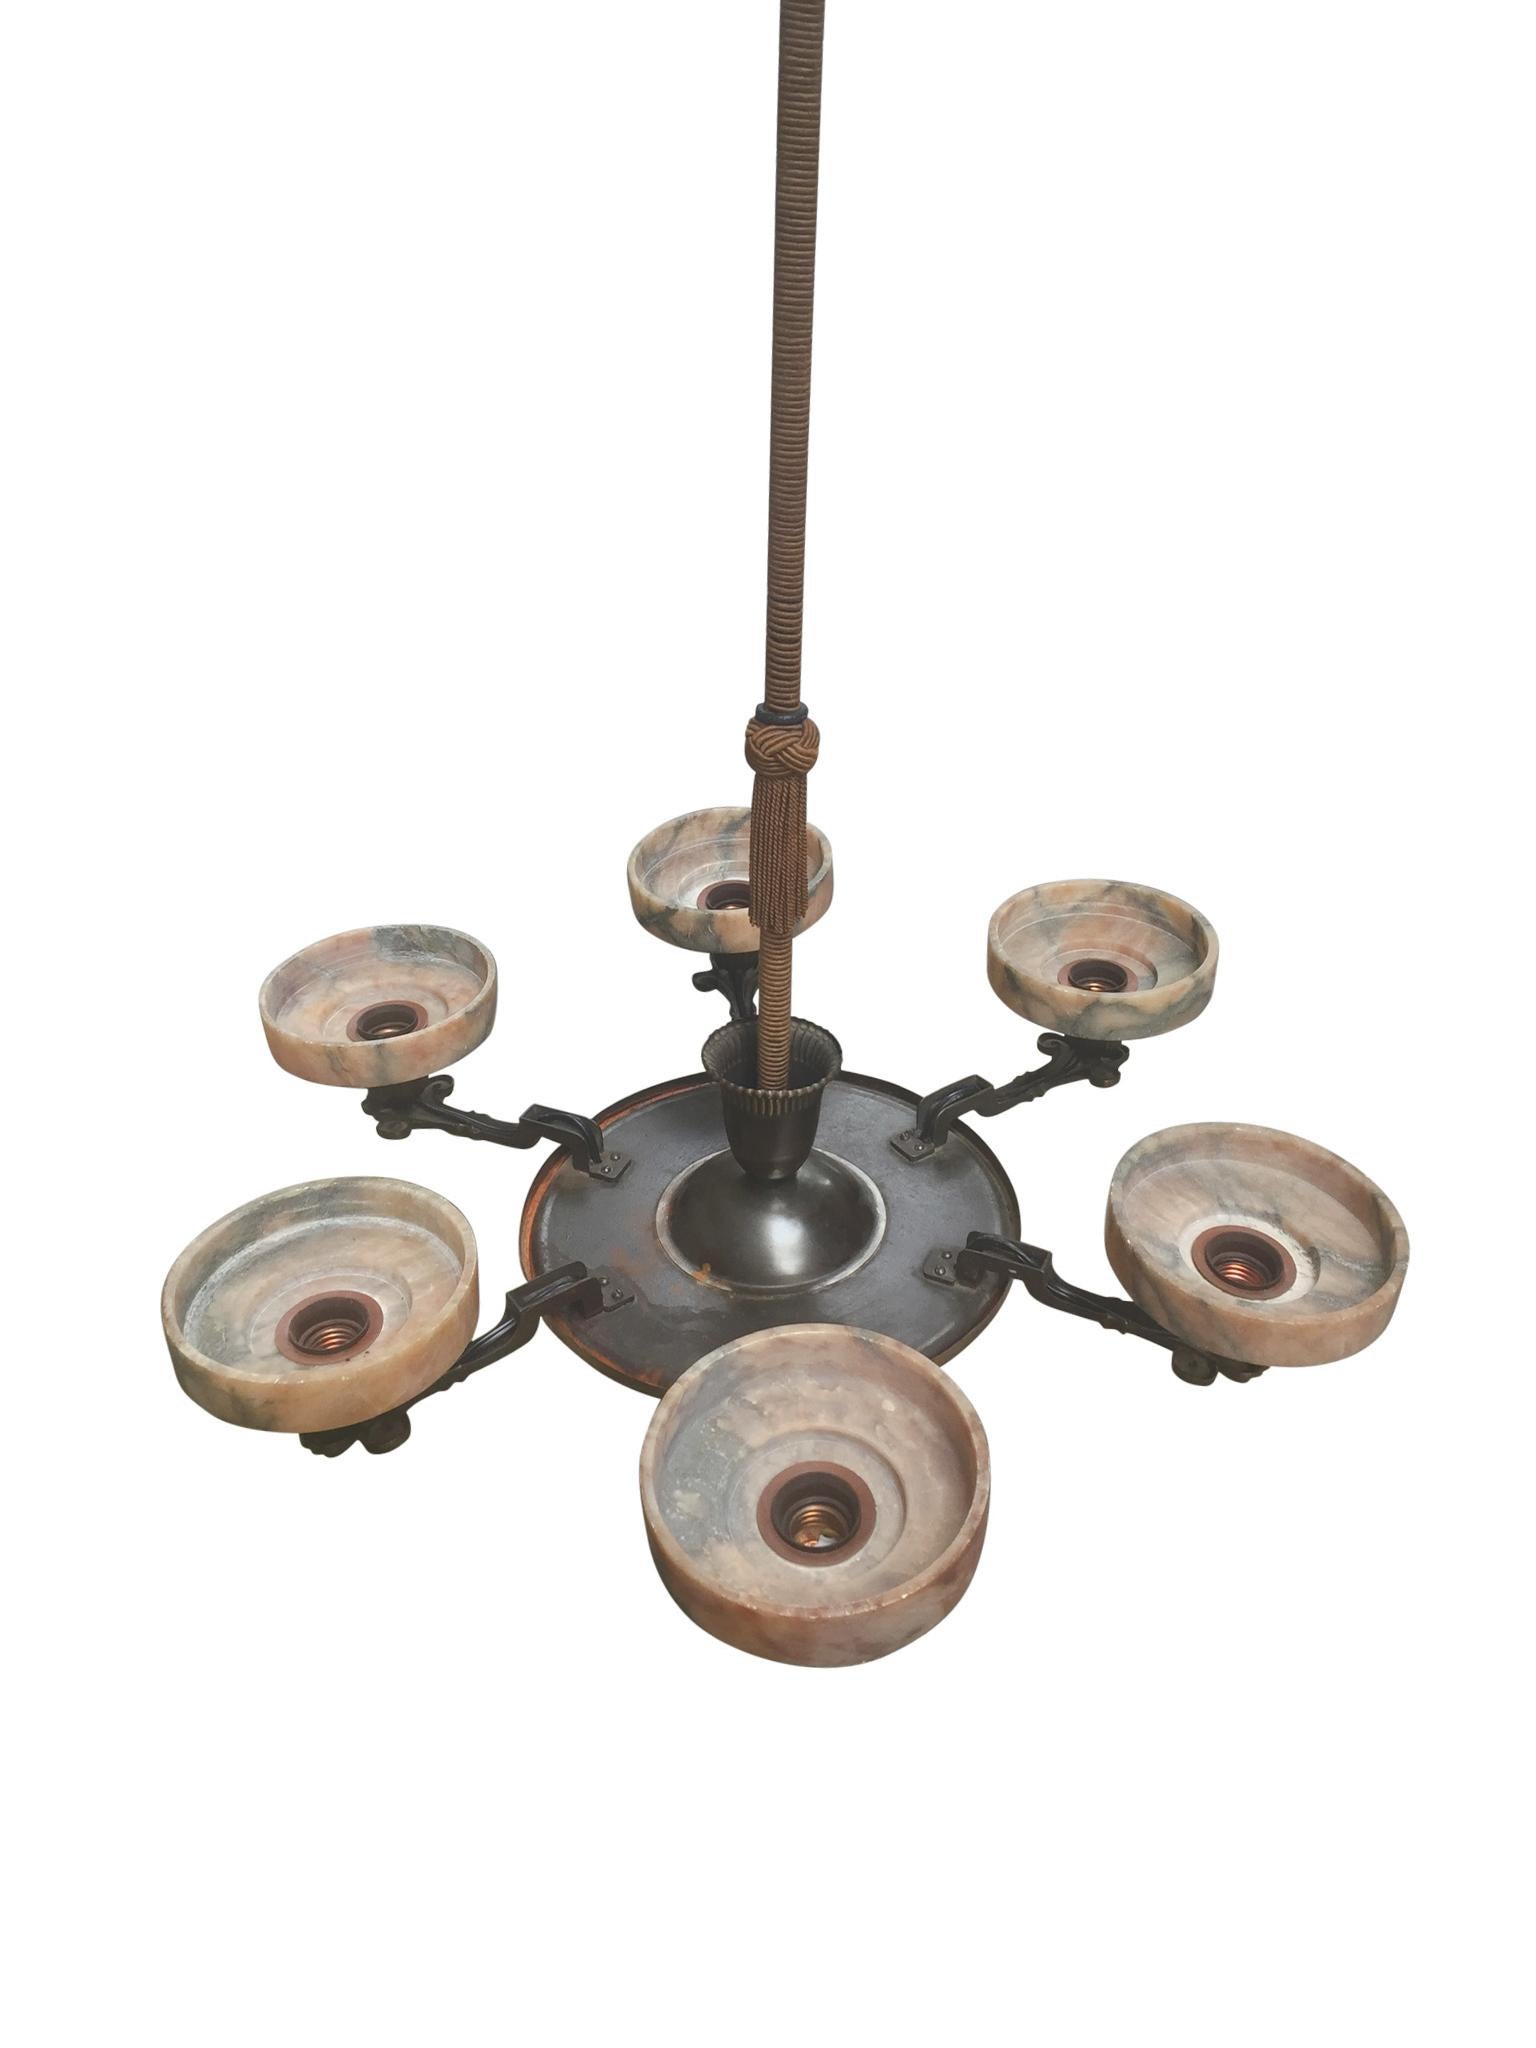 A beautifully crafted Danish Art Deco chandelier made in the 1930s. Comprised of bronze arms, canopy, & column, with rope trimming. The candle-style collars are marble with a nice pink hue. Each bobeche holds a single bulb. There are 6 sockets in